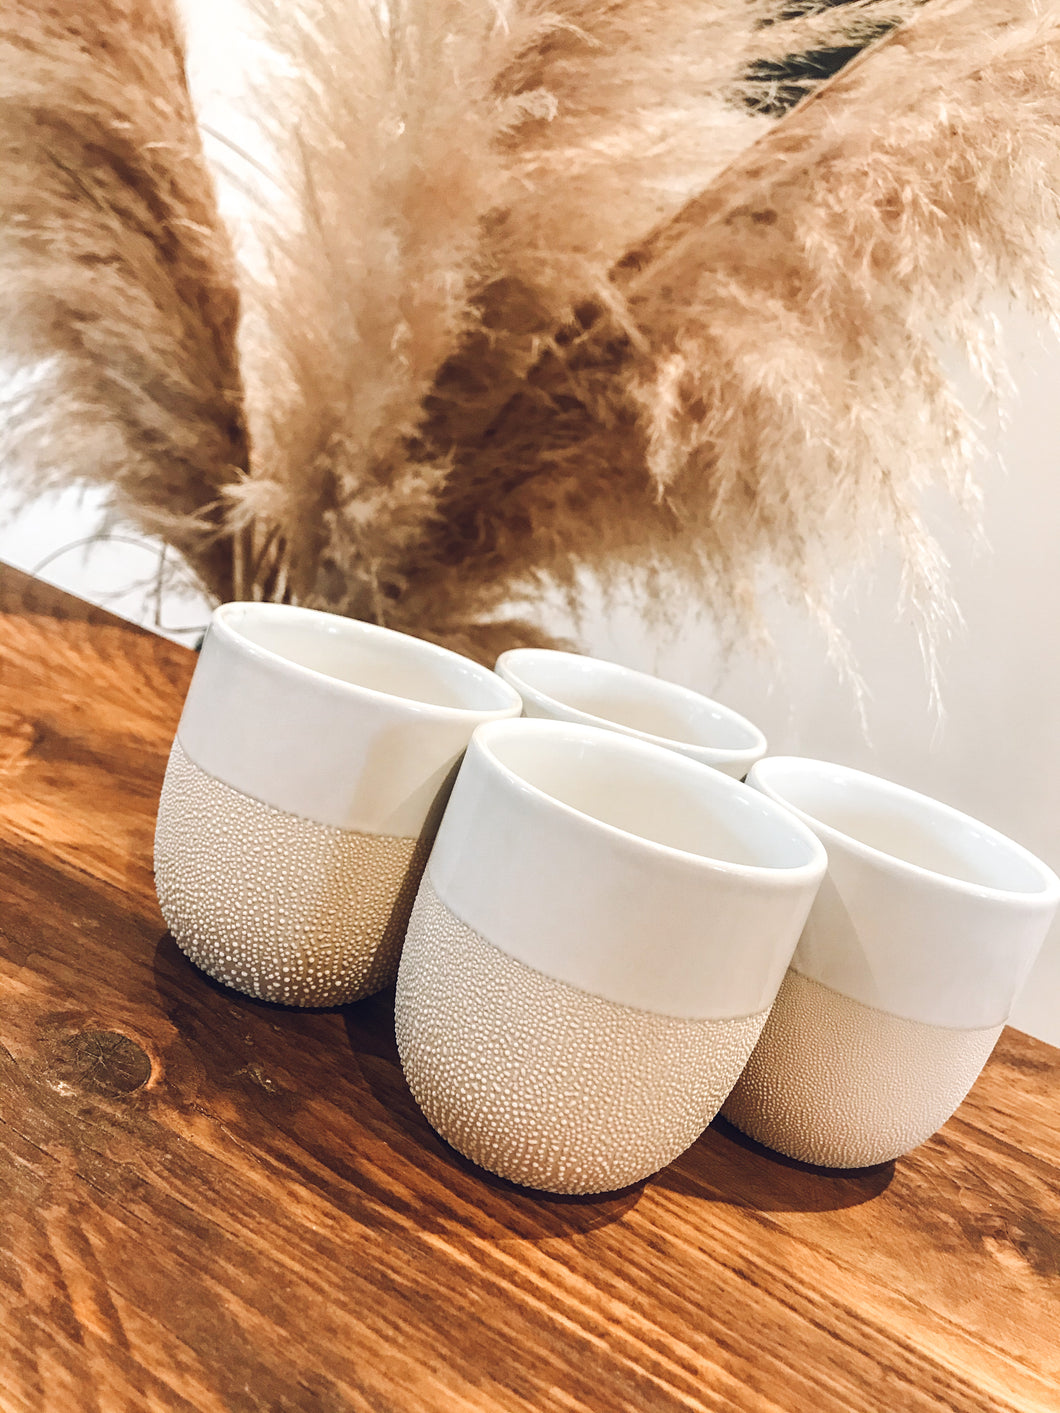 Textured white | flat white | coffee cups | set of four